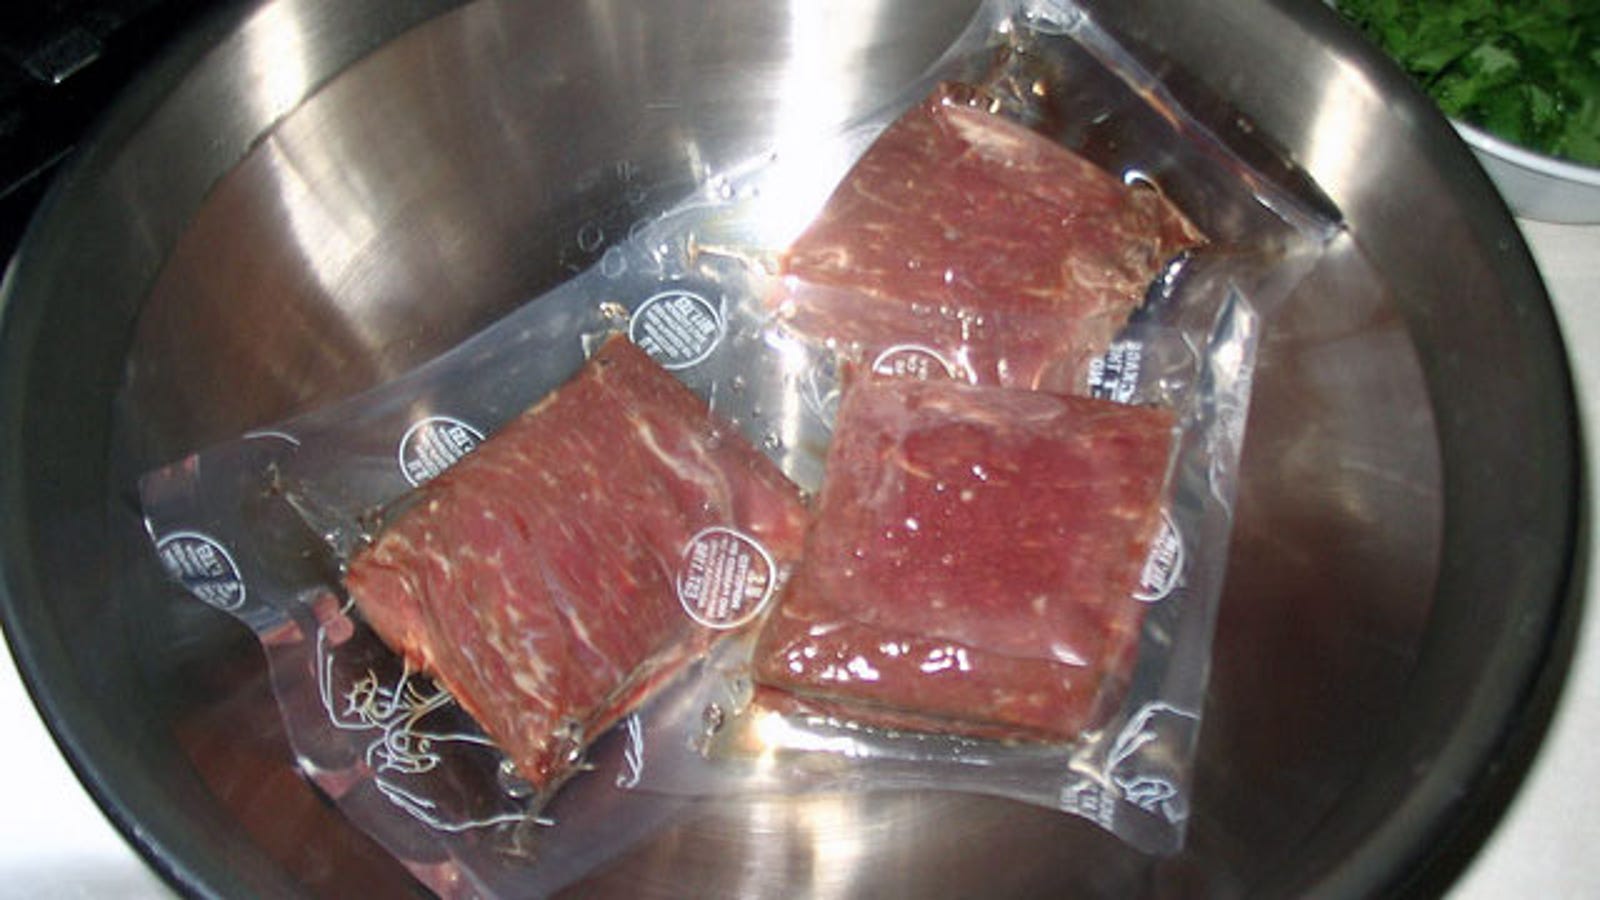 Does meat thaw faster in cold water or hot water? - Foodly